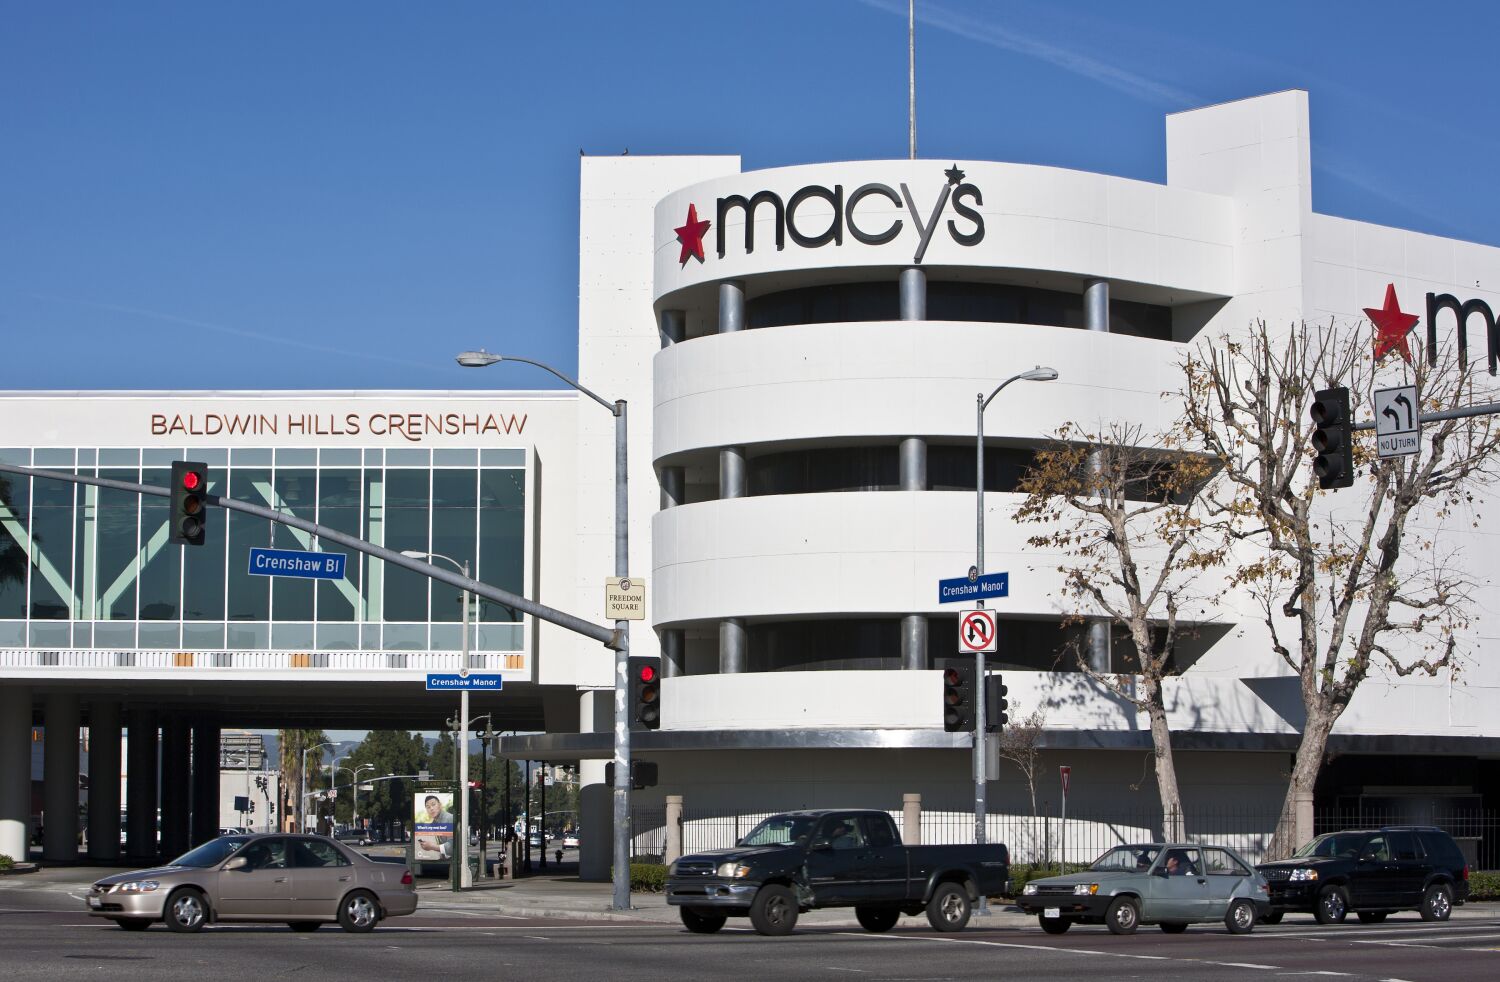 Op-Ed: The undeniable loss of 'my Macy's'